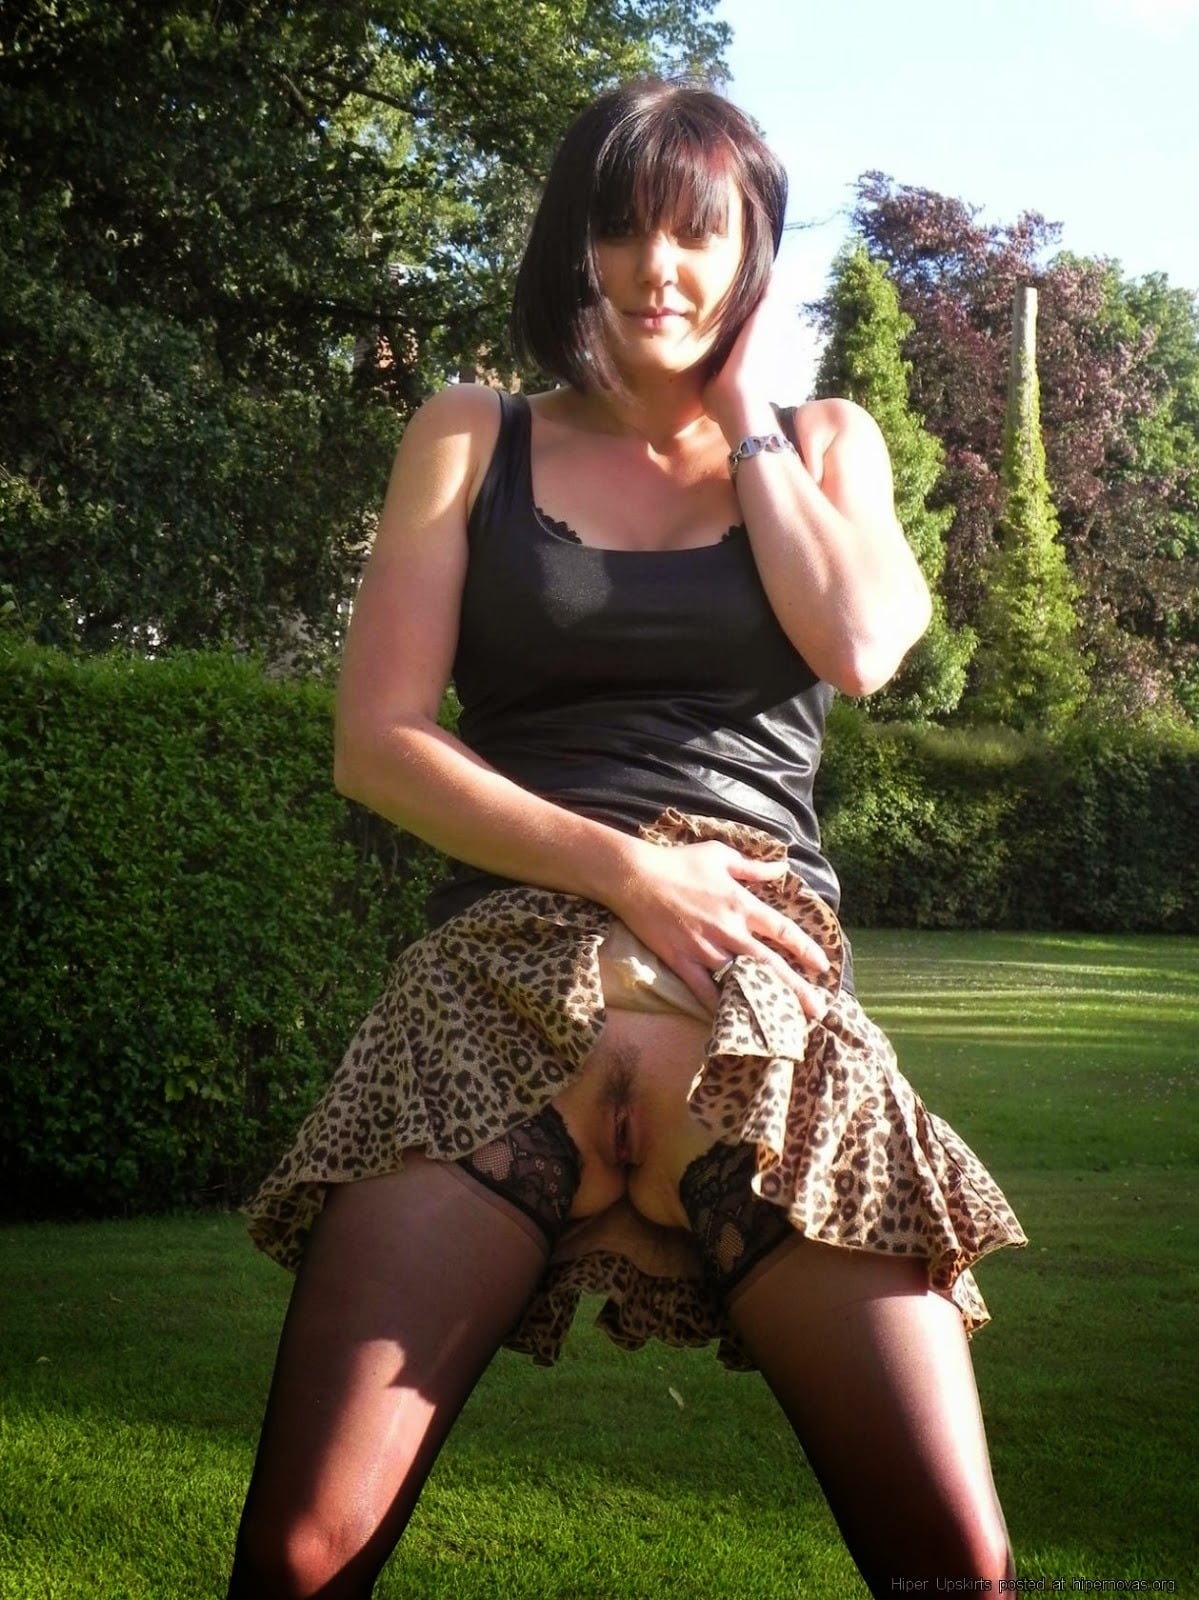 upskirt pussy flash hairy pussy dark haired brunette bottomless under the leopard skirt is a naked pussy